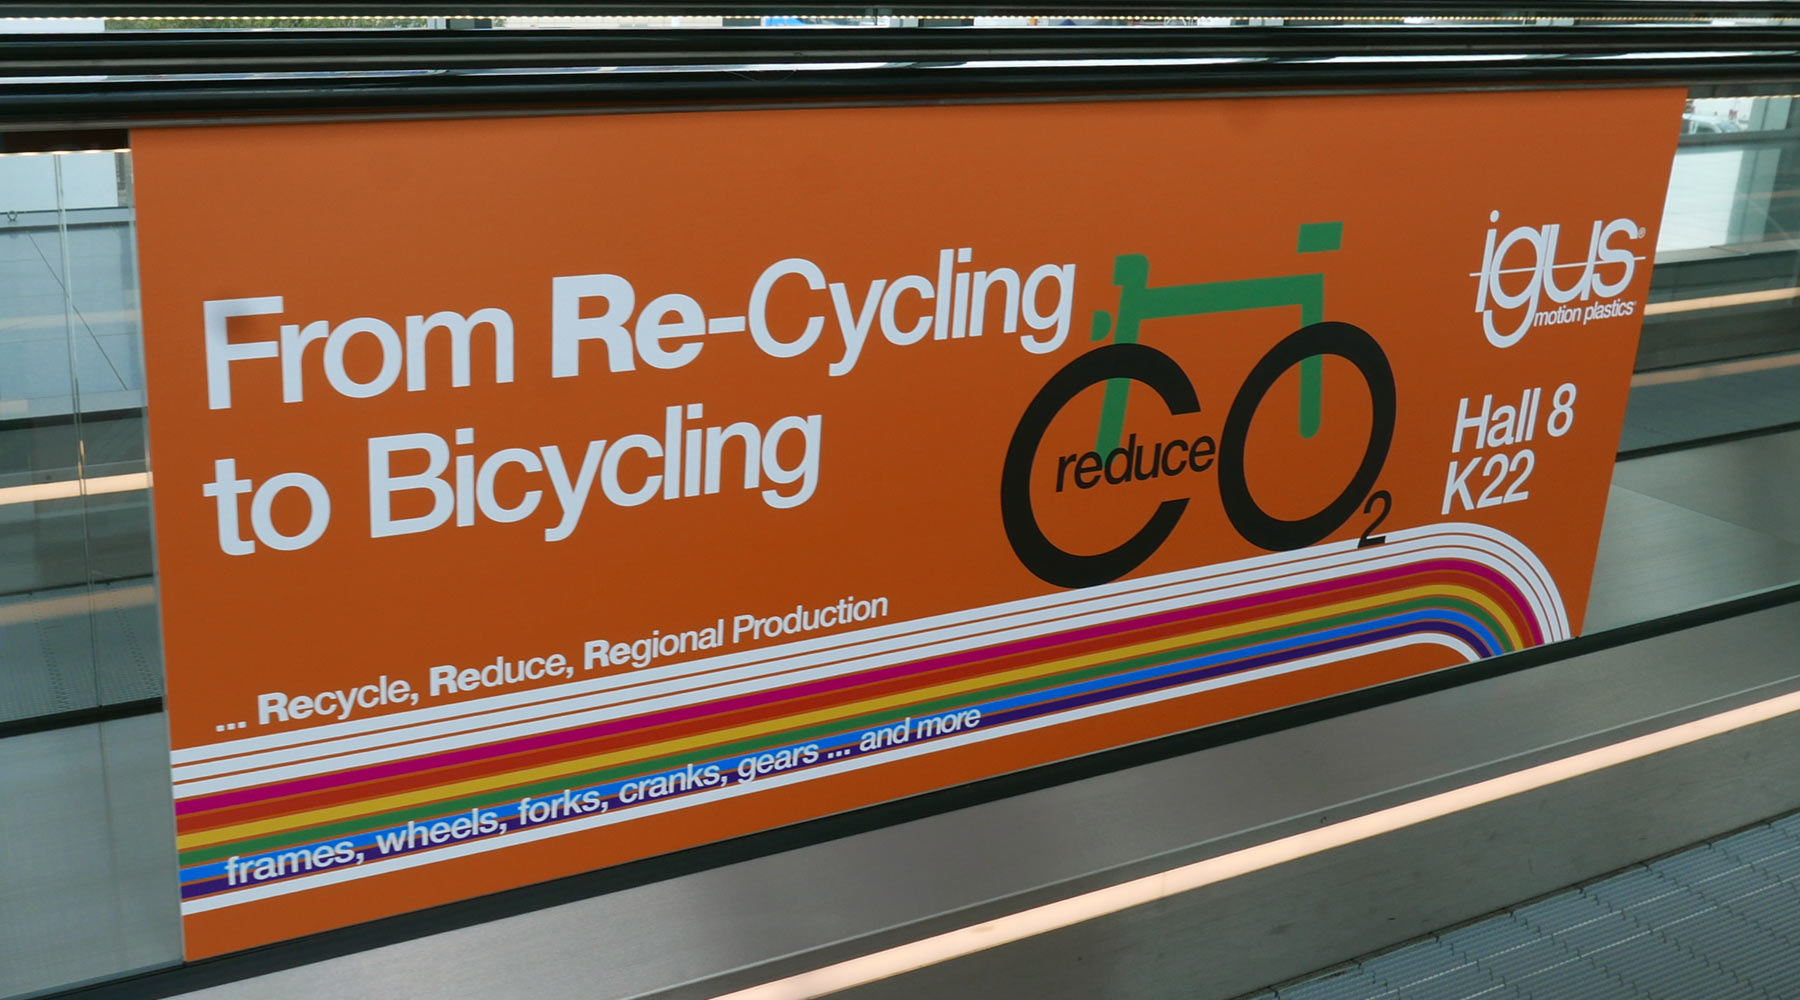 Eurobike 2023, the largest cycling industry trade show, IGUS recycling